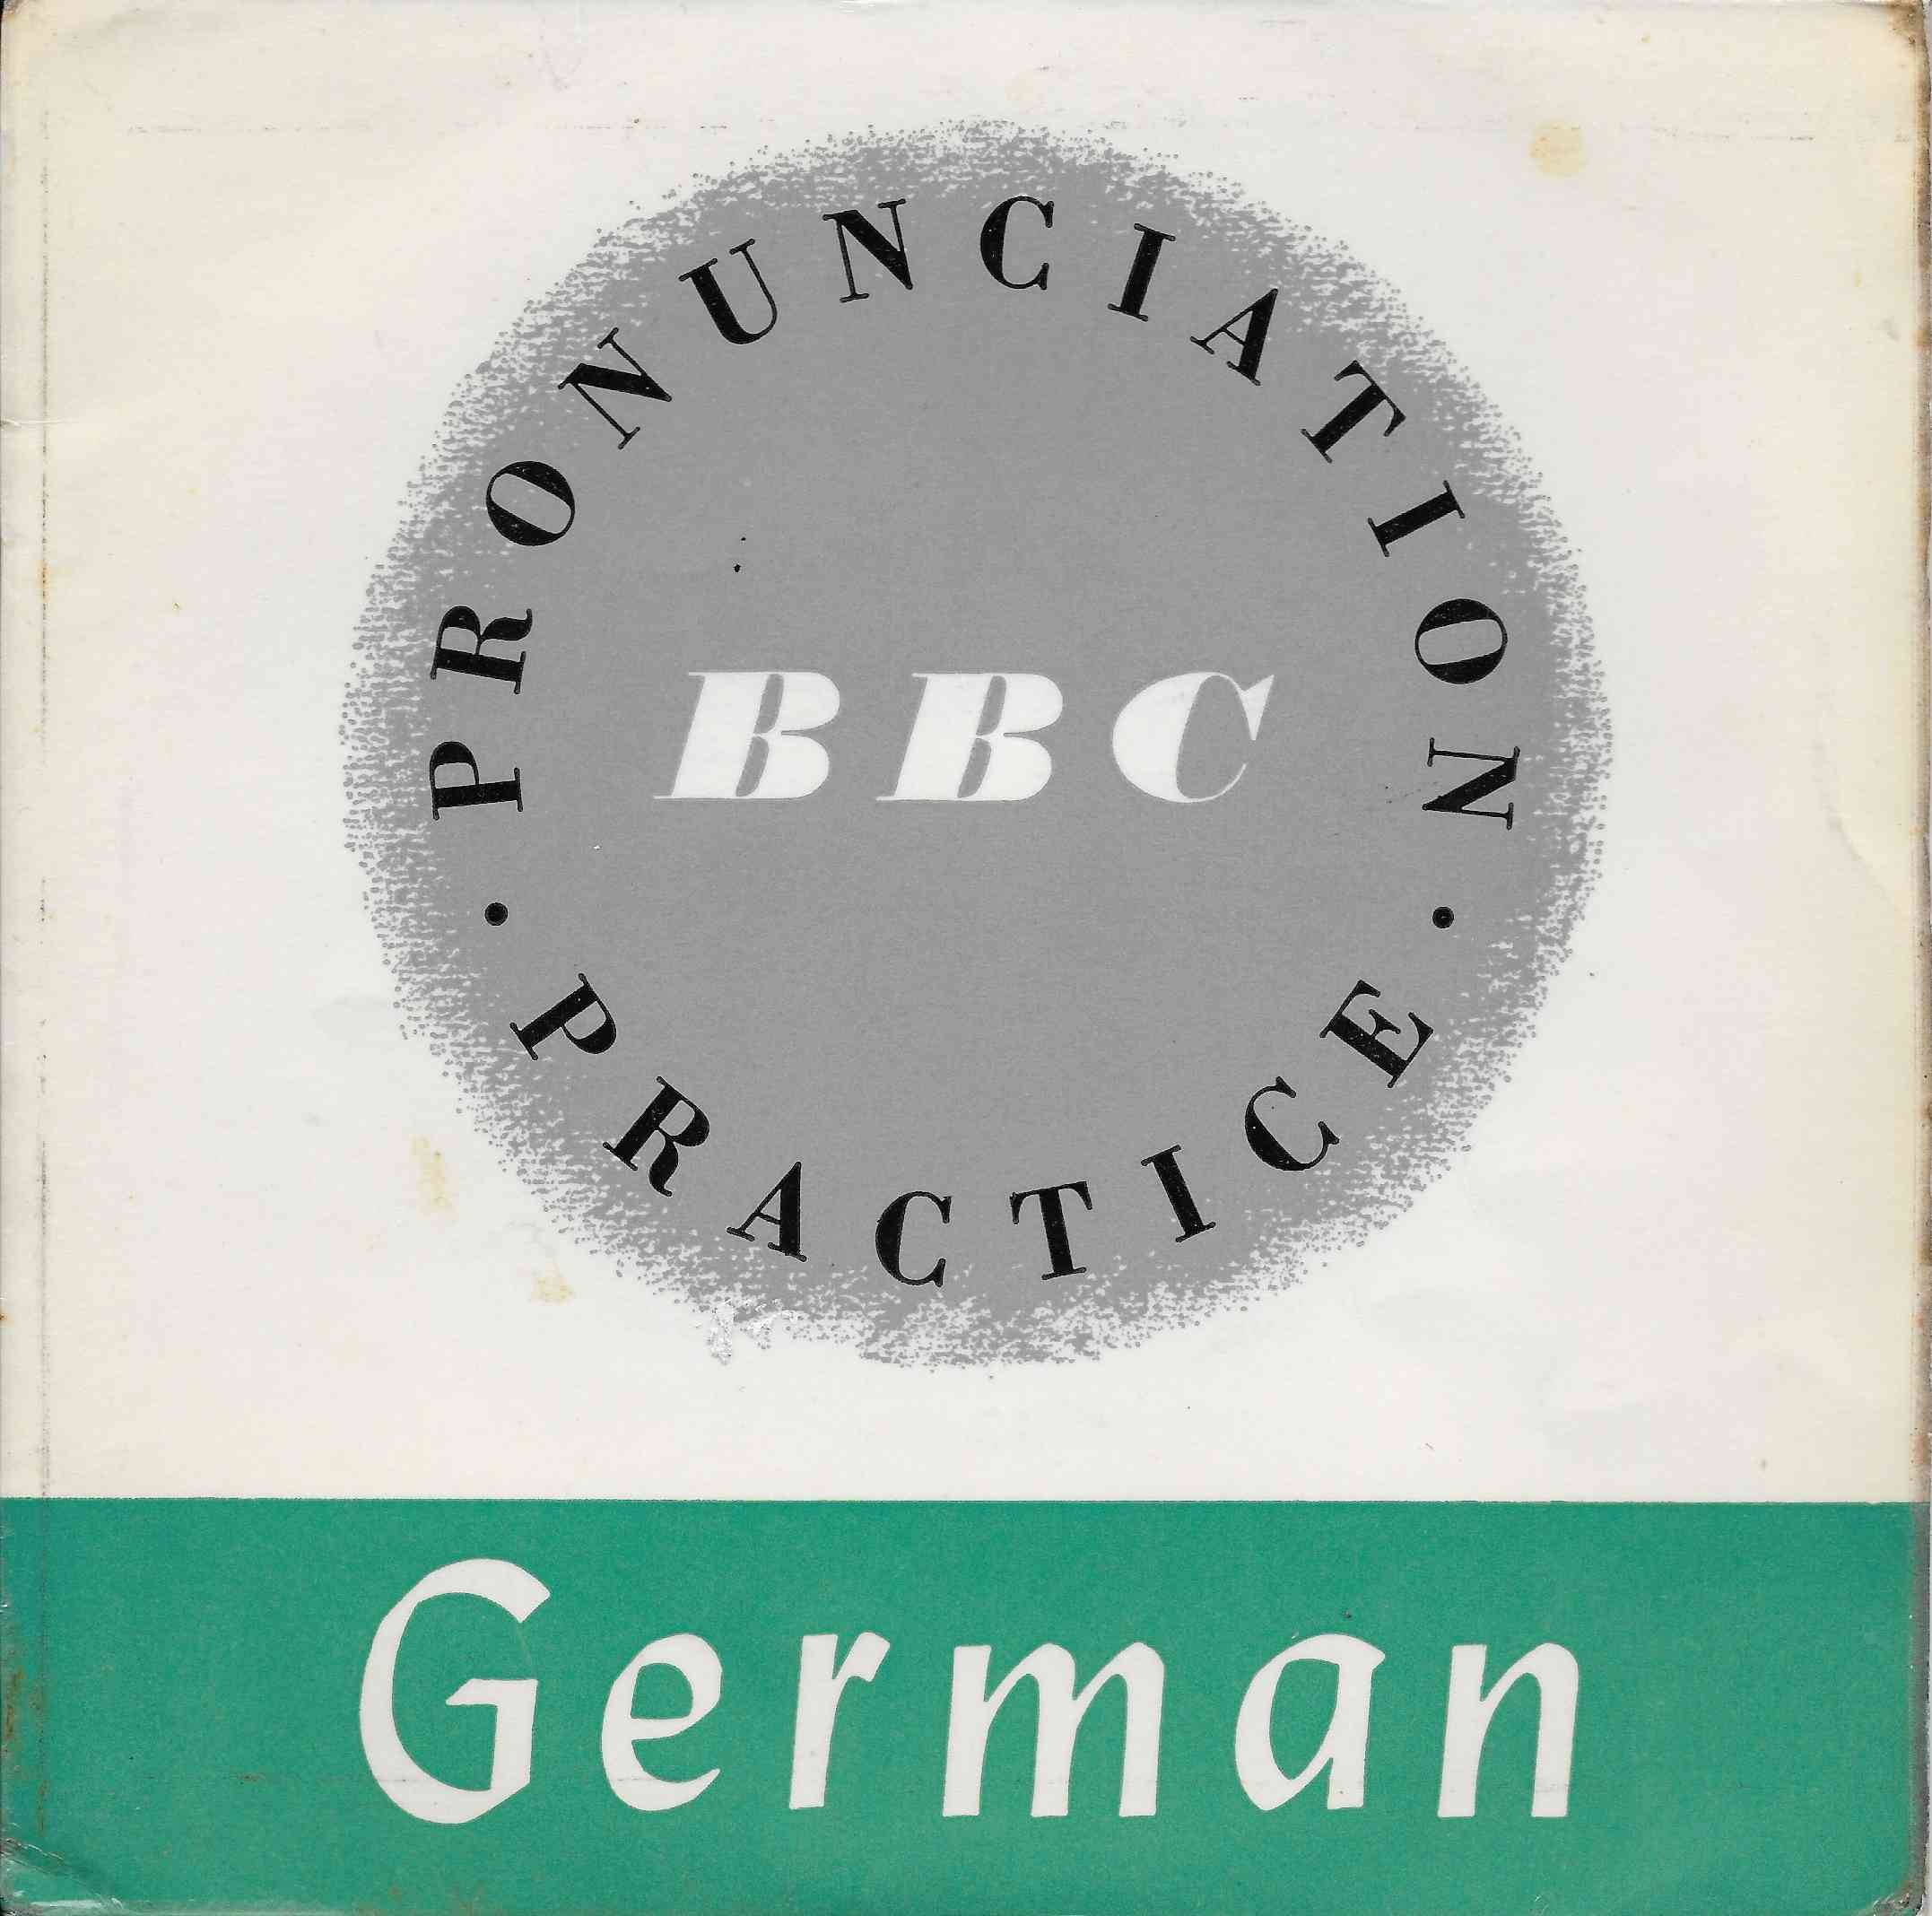 Picture of GER-A-1 German by artist John L. M. Trim from the BBC singles - Records and Tapes library